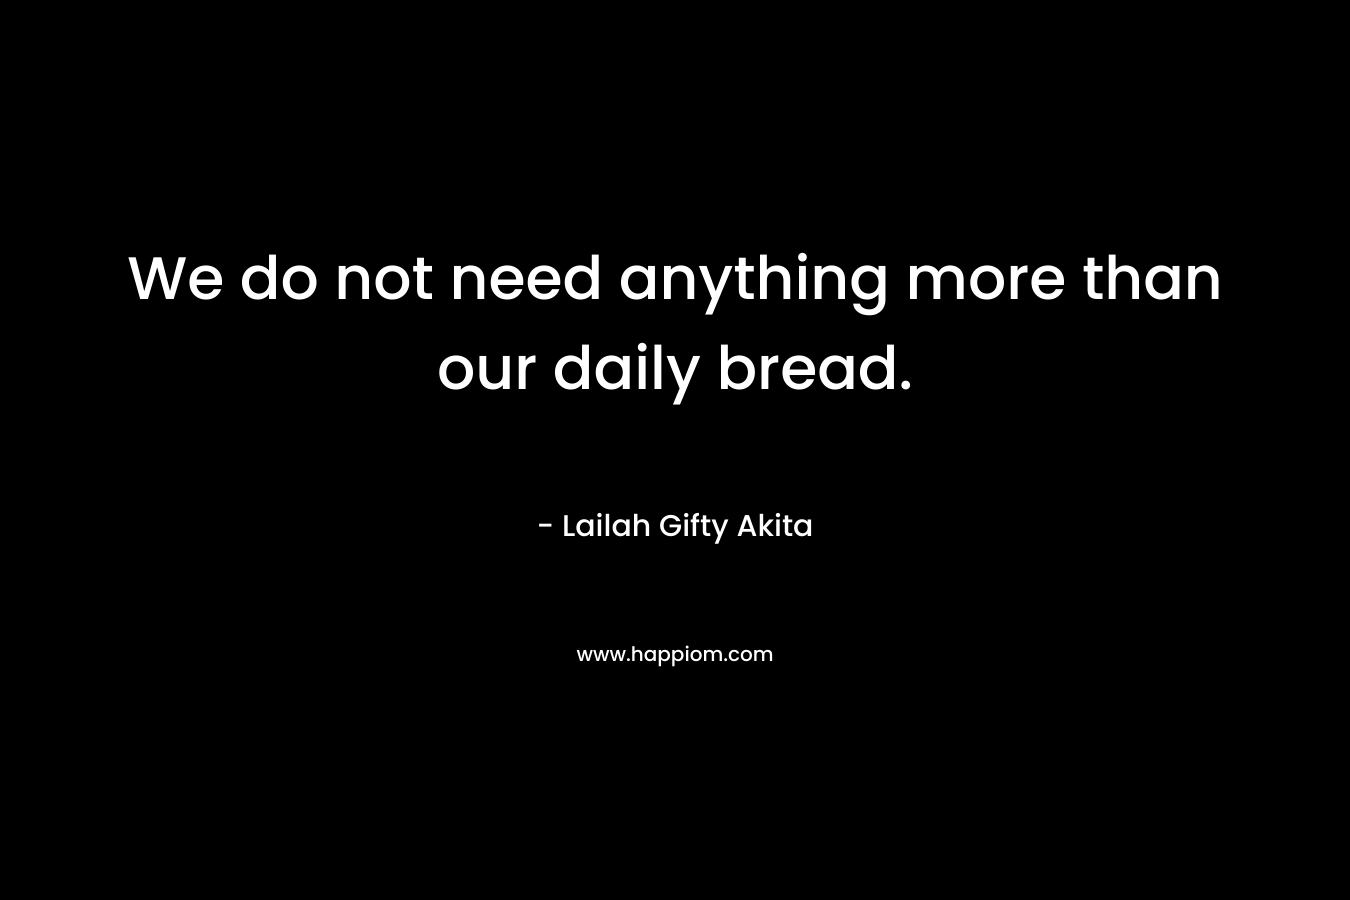 We do not need anything more than our daily bread.